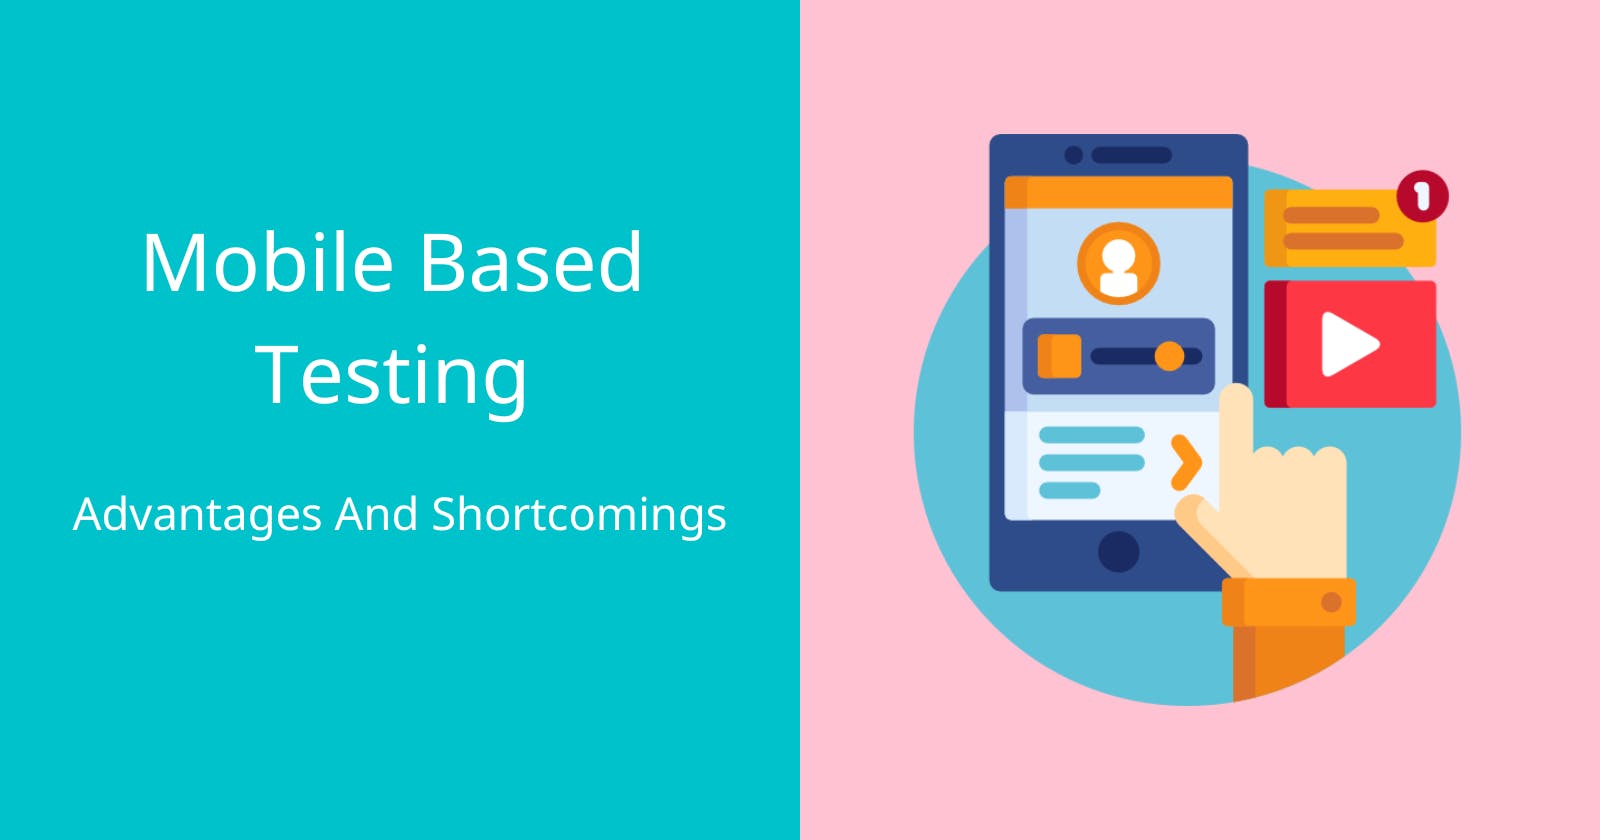 The Advantages And Shortcomings Of Mobile-Based Testing